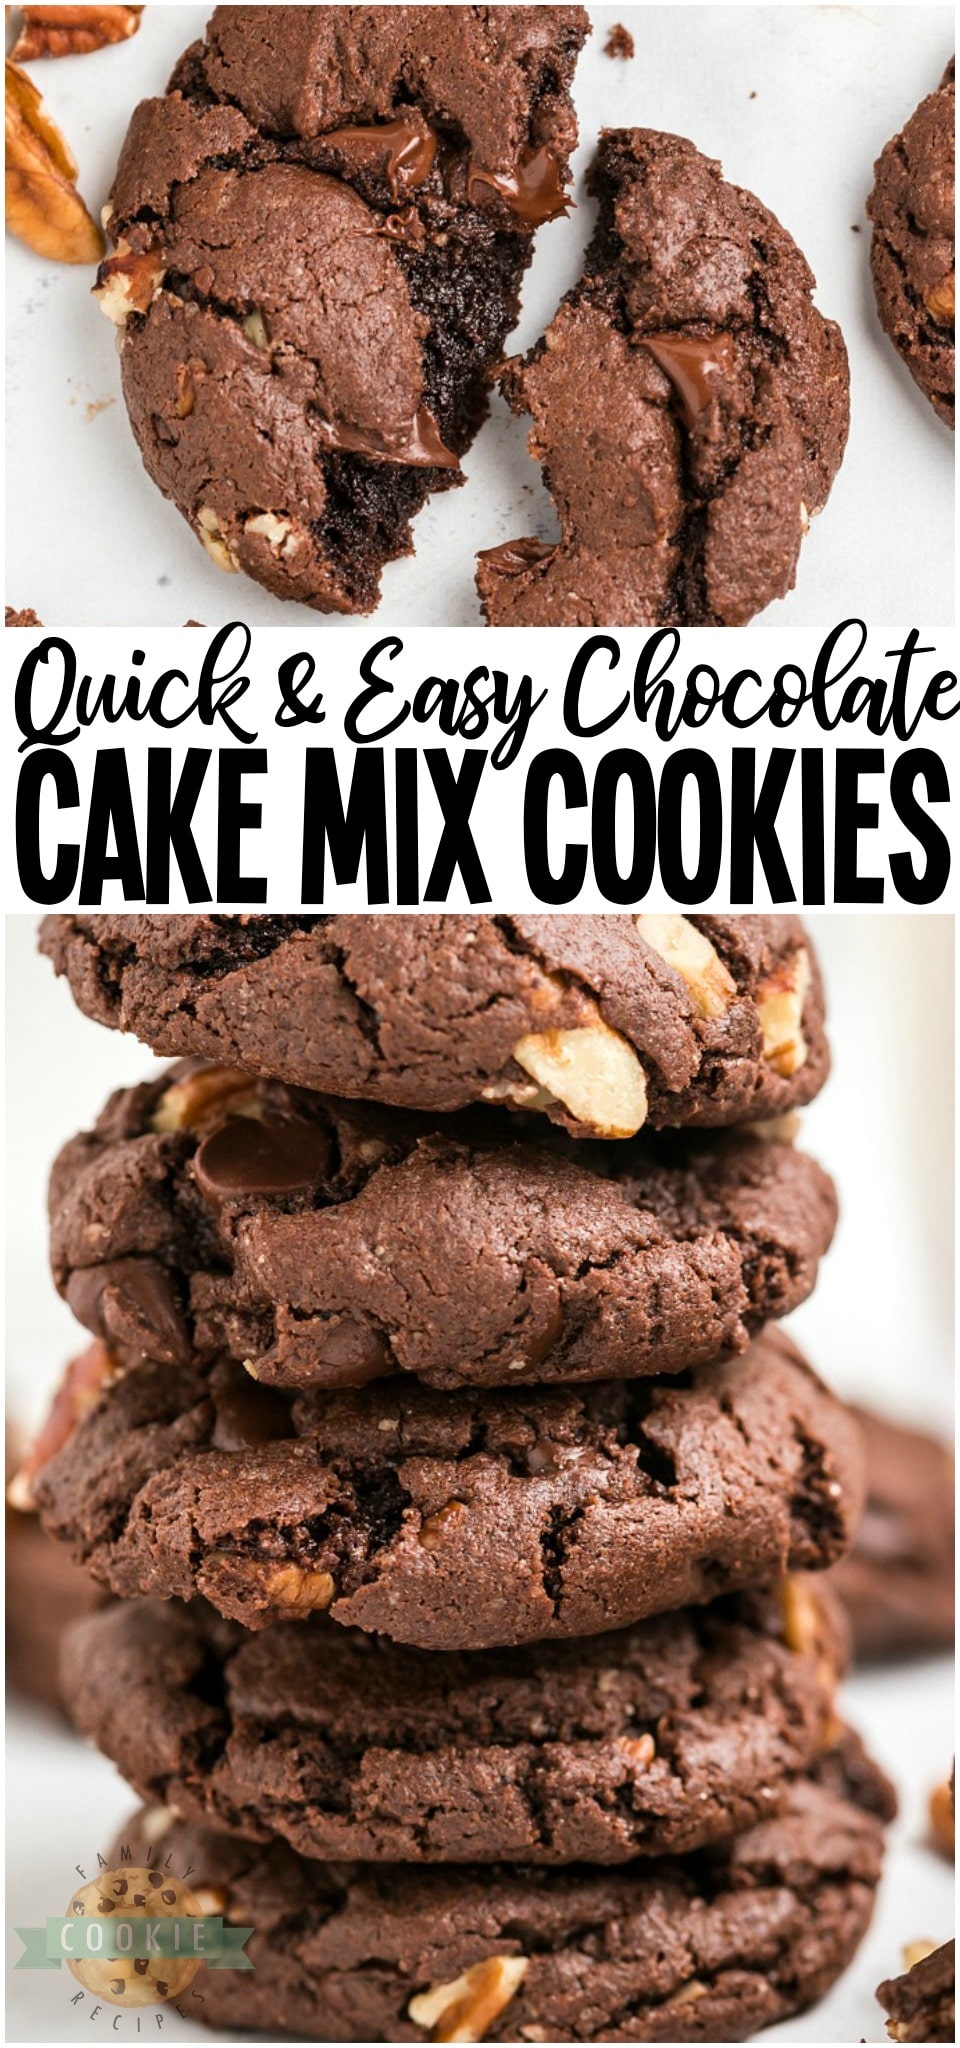 Chocolate Cake Mix Cookies made with 5 ingredients in minutes! Soft, fudgy chocolate cookies made from cake mix loaded with chocolate chips and pecans. Perfect easy chocolate cake mix cookie recipe! #cookies #chocolate #cakemix #easycookies #cookie #recipe #baking #dessert from FAMILY COOKIE RECIPES via @buttergirls